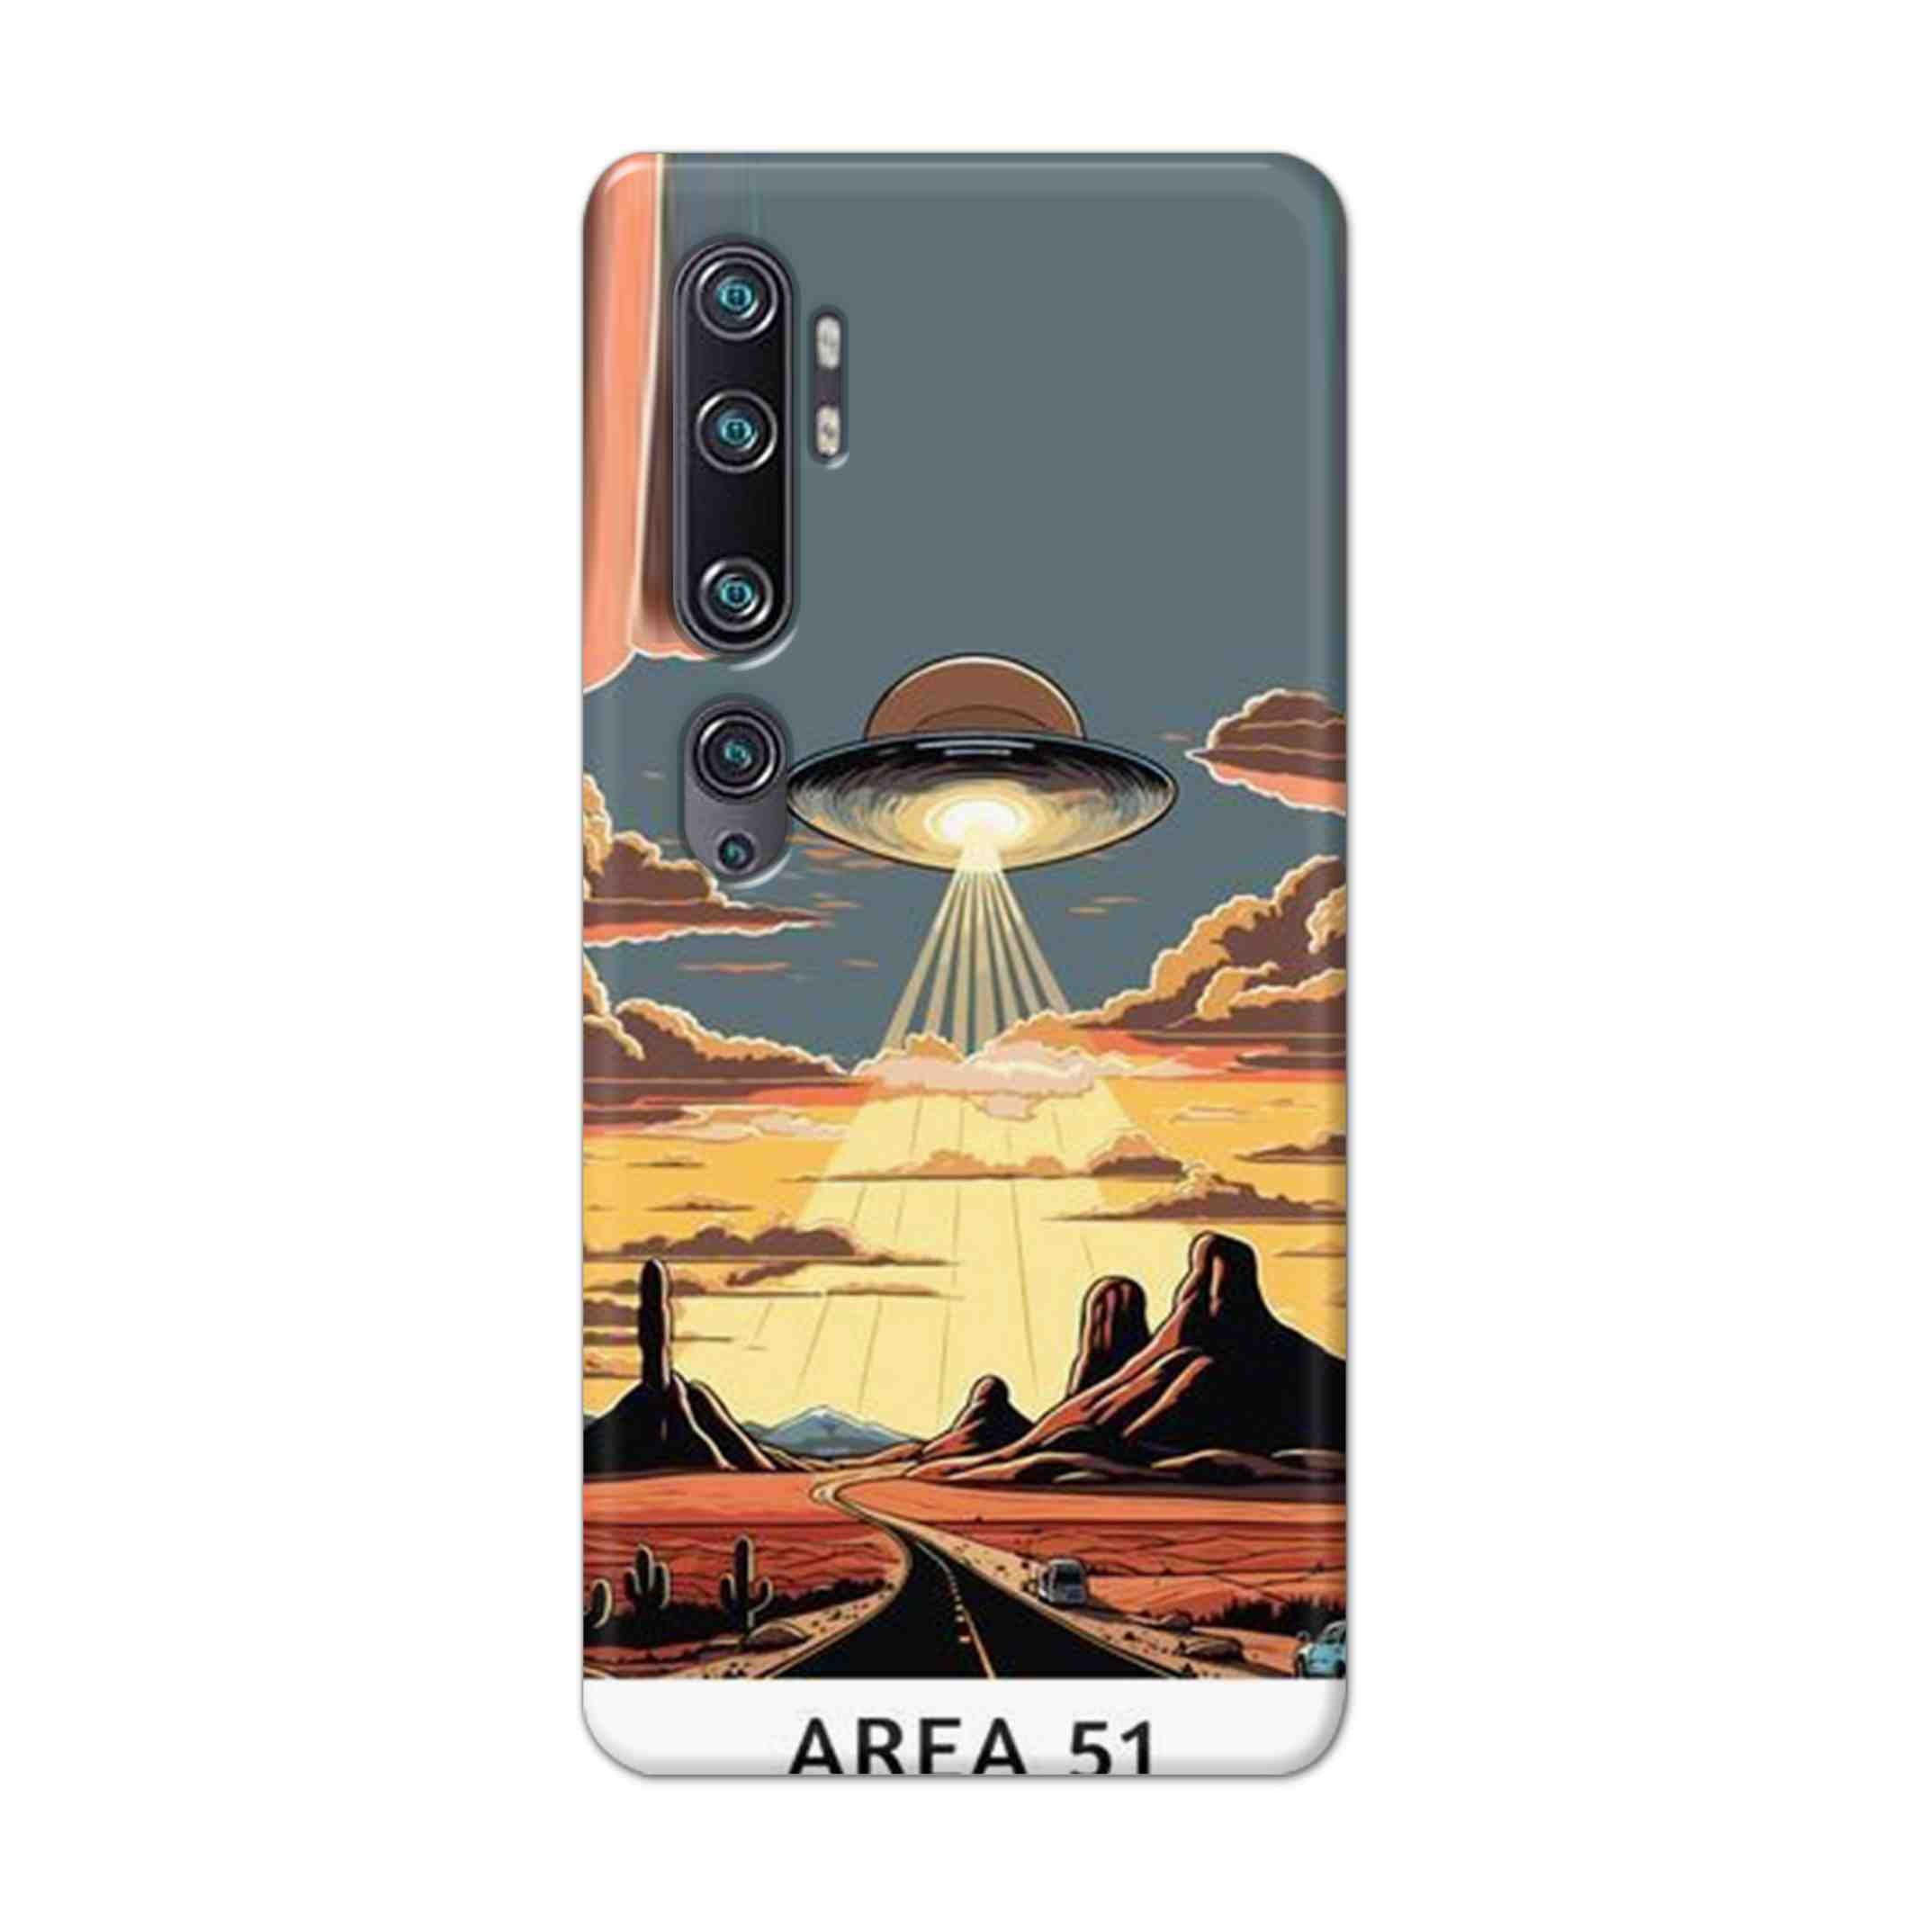 Buy Area 51 Hard Back Mobile Phone Case Cover For Xiaomi Mi Note 10 Online